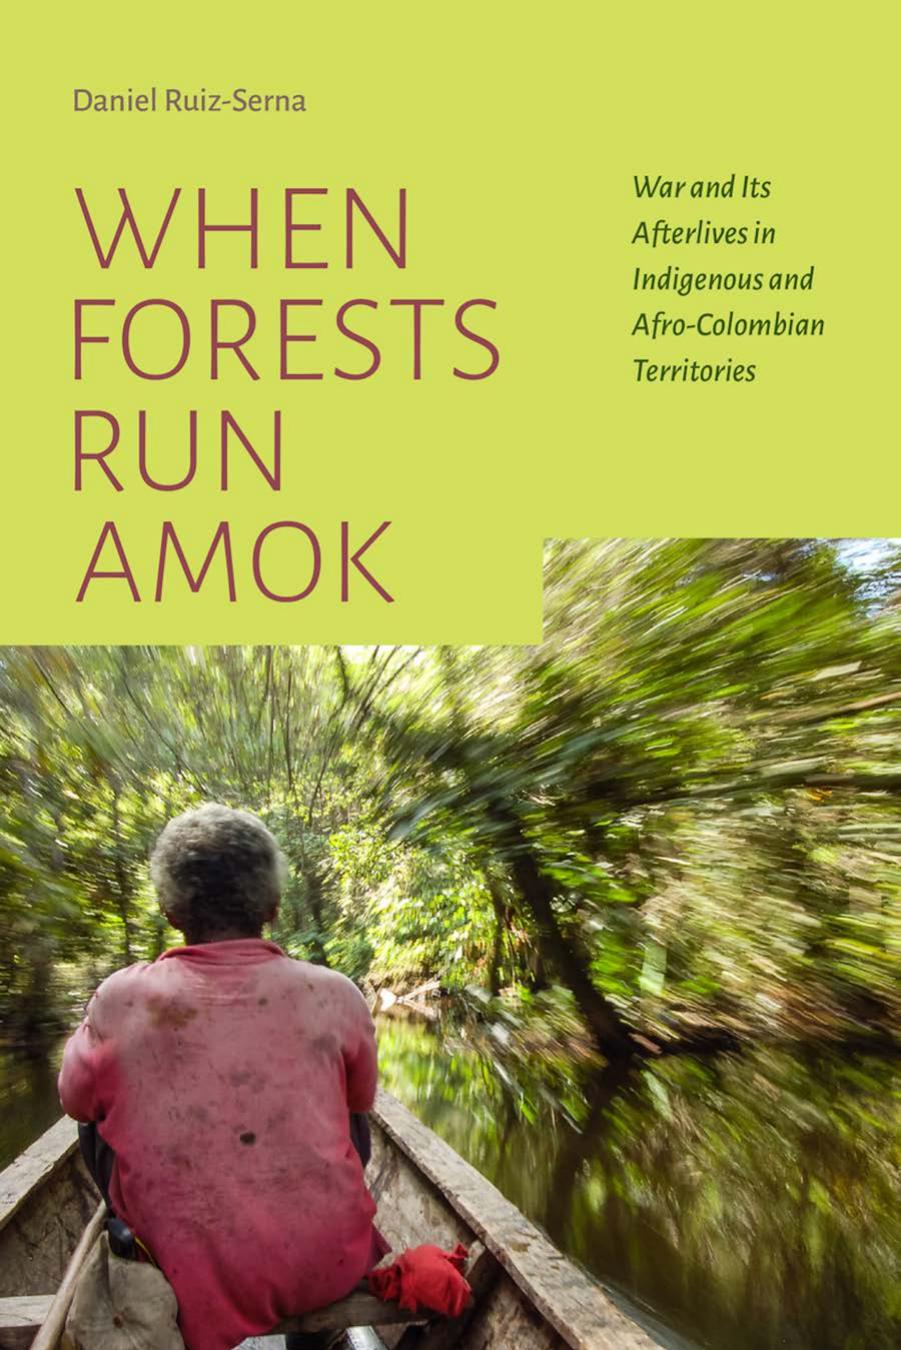 When Forests Run Amok: War and Its Afterlives in Indigenous and Afro-Colombian Territories by Daniel Ruiz-Serna